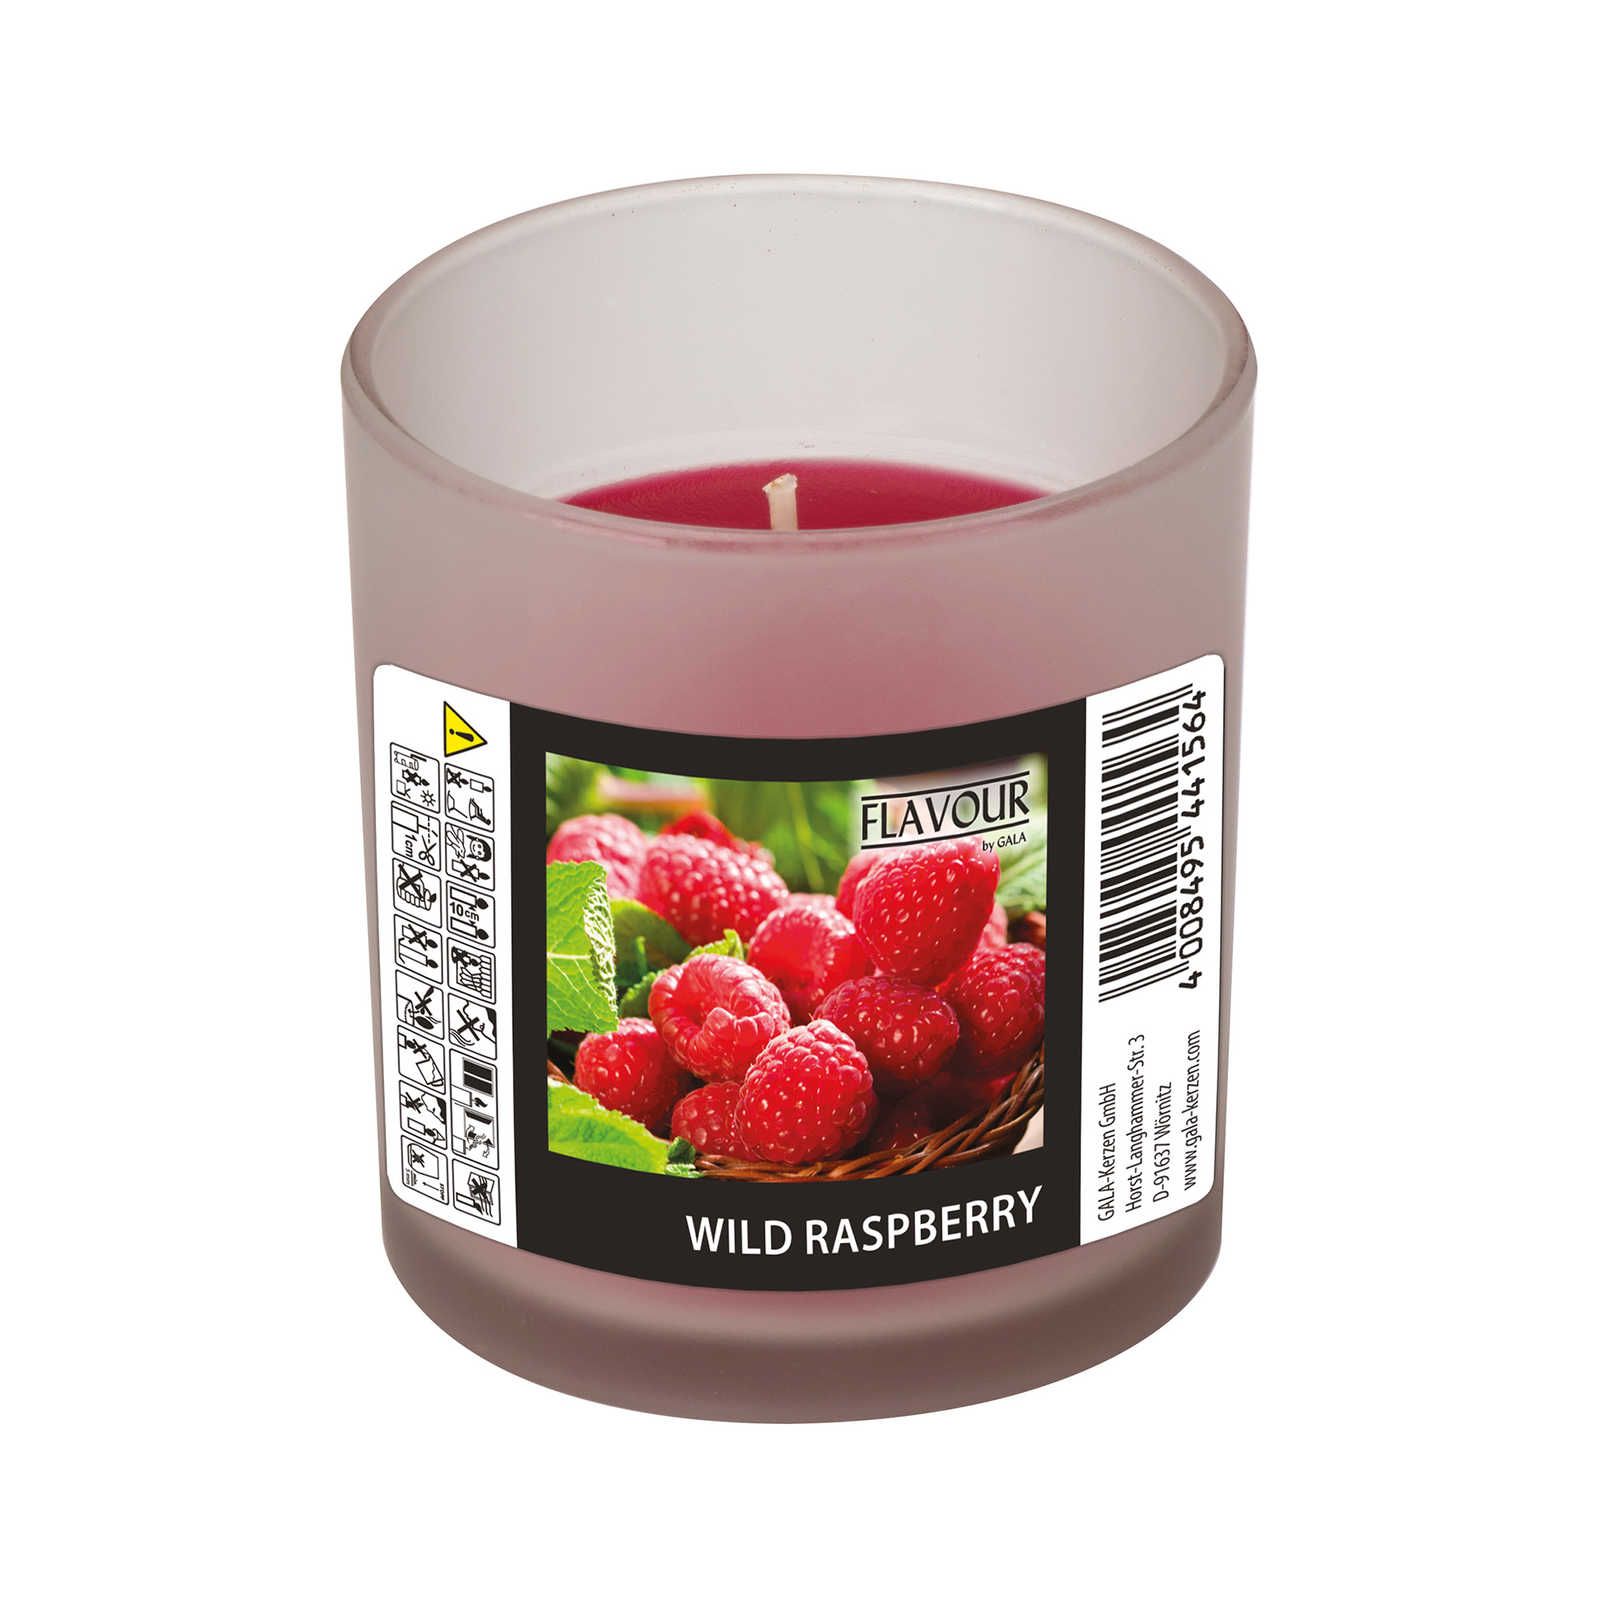             Raspberry scented candle with sweet scent - 110g
        